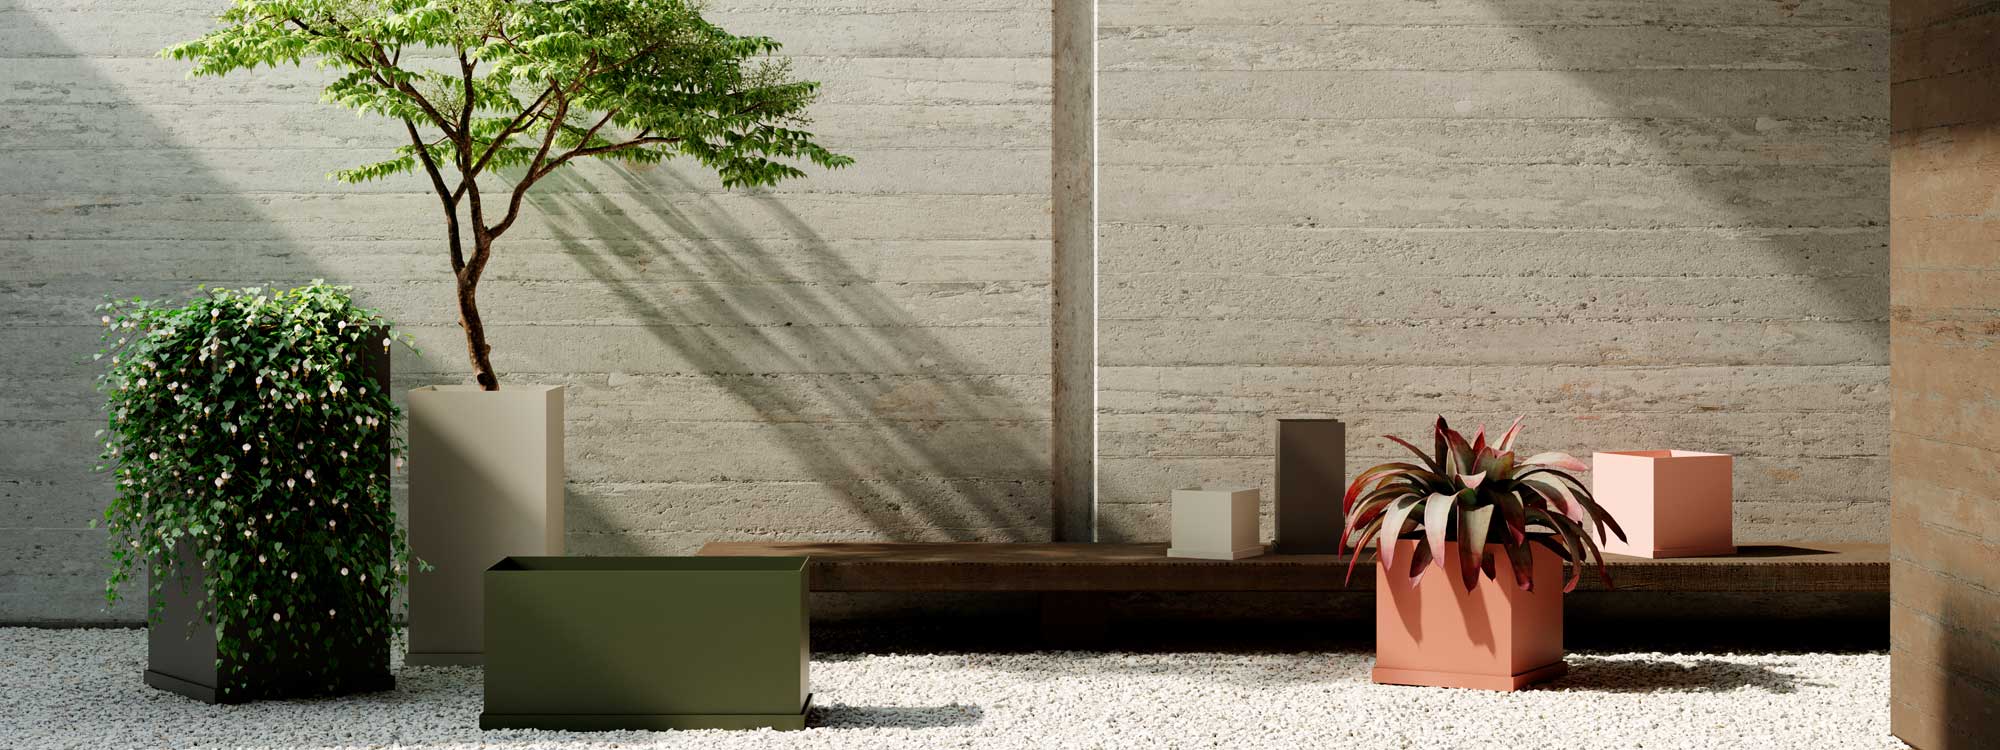 Image of configuration of various sizes and colors of OiPots modern geometric planters, shown on pale gravel floor with poured concrete wall in the background